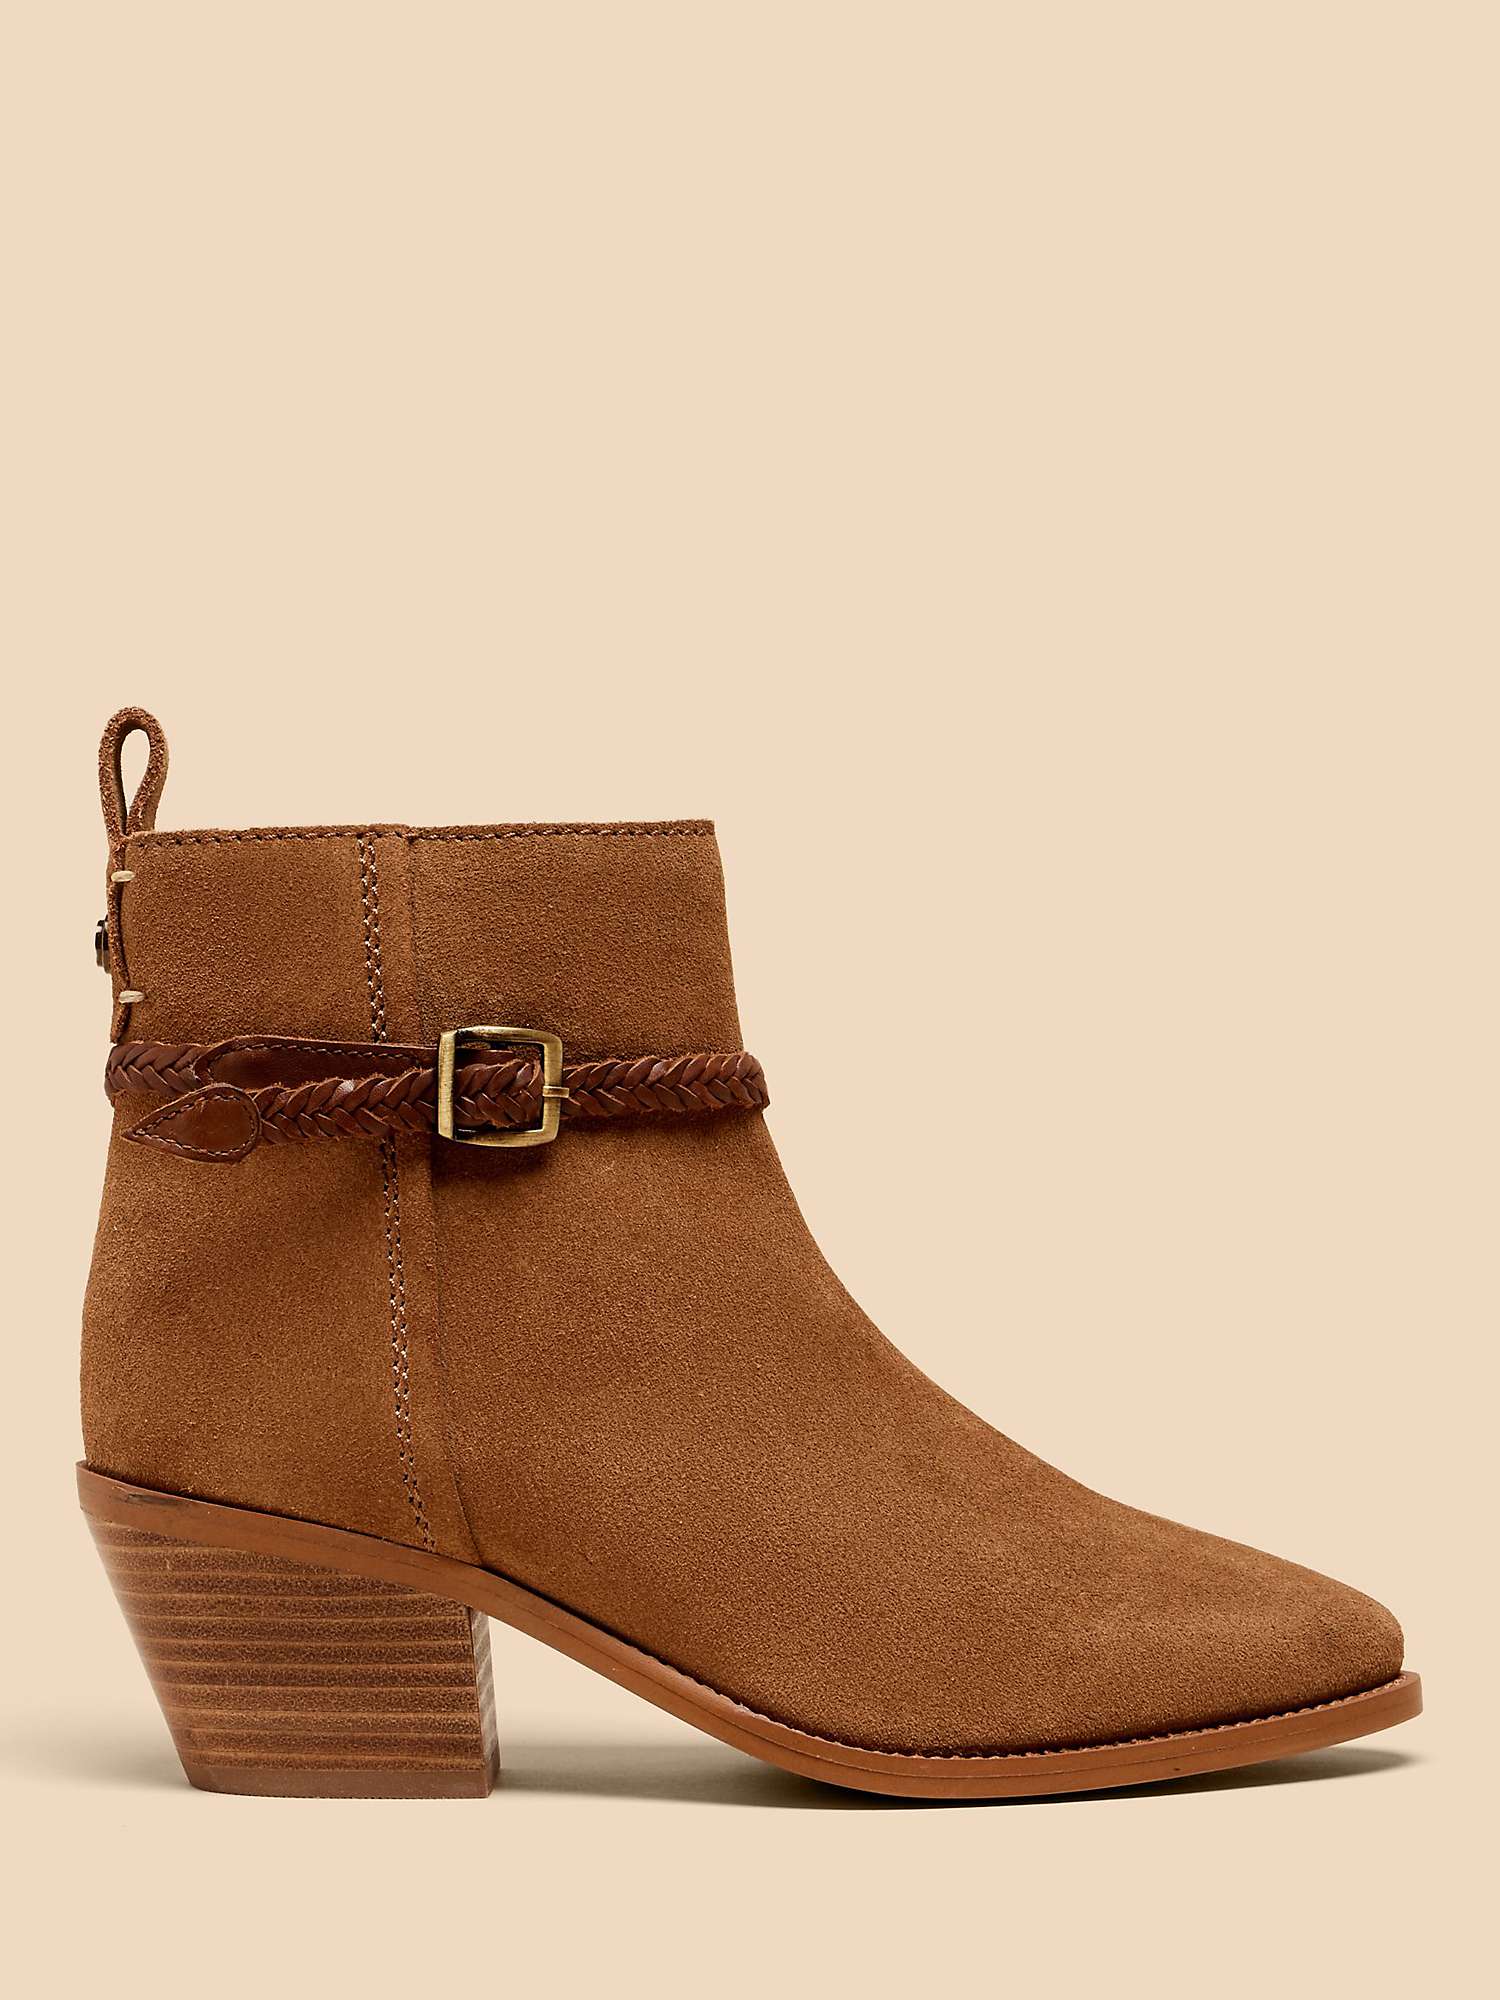 Buy White Stuff Plait Strap Suede Ankle Boots, Mid Tan Online at johnlewis.com